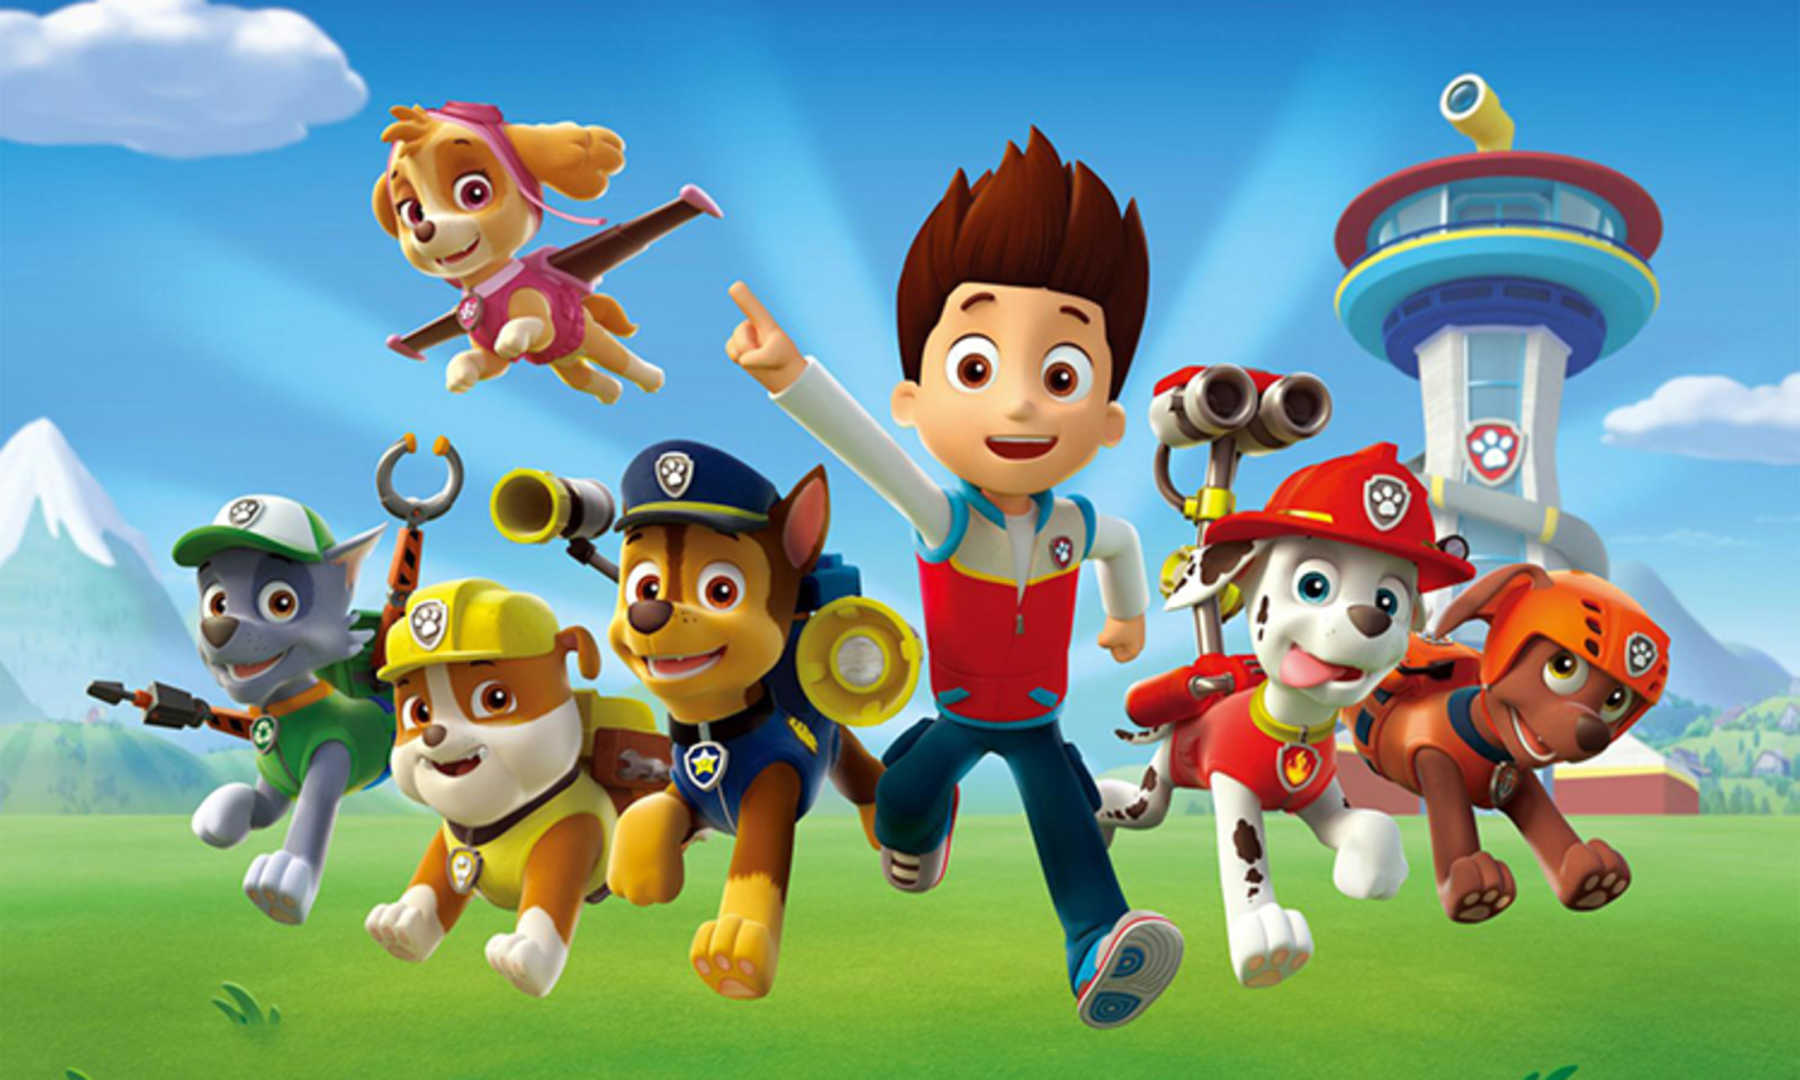 9 Very Important Questions I Have for the Makers of 'Paw Patrol' ...